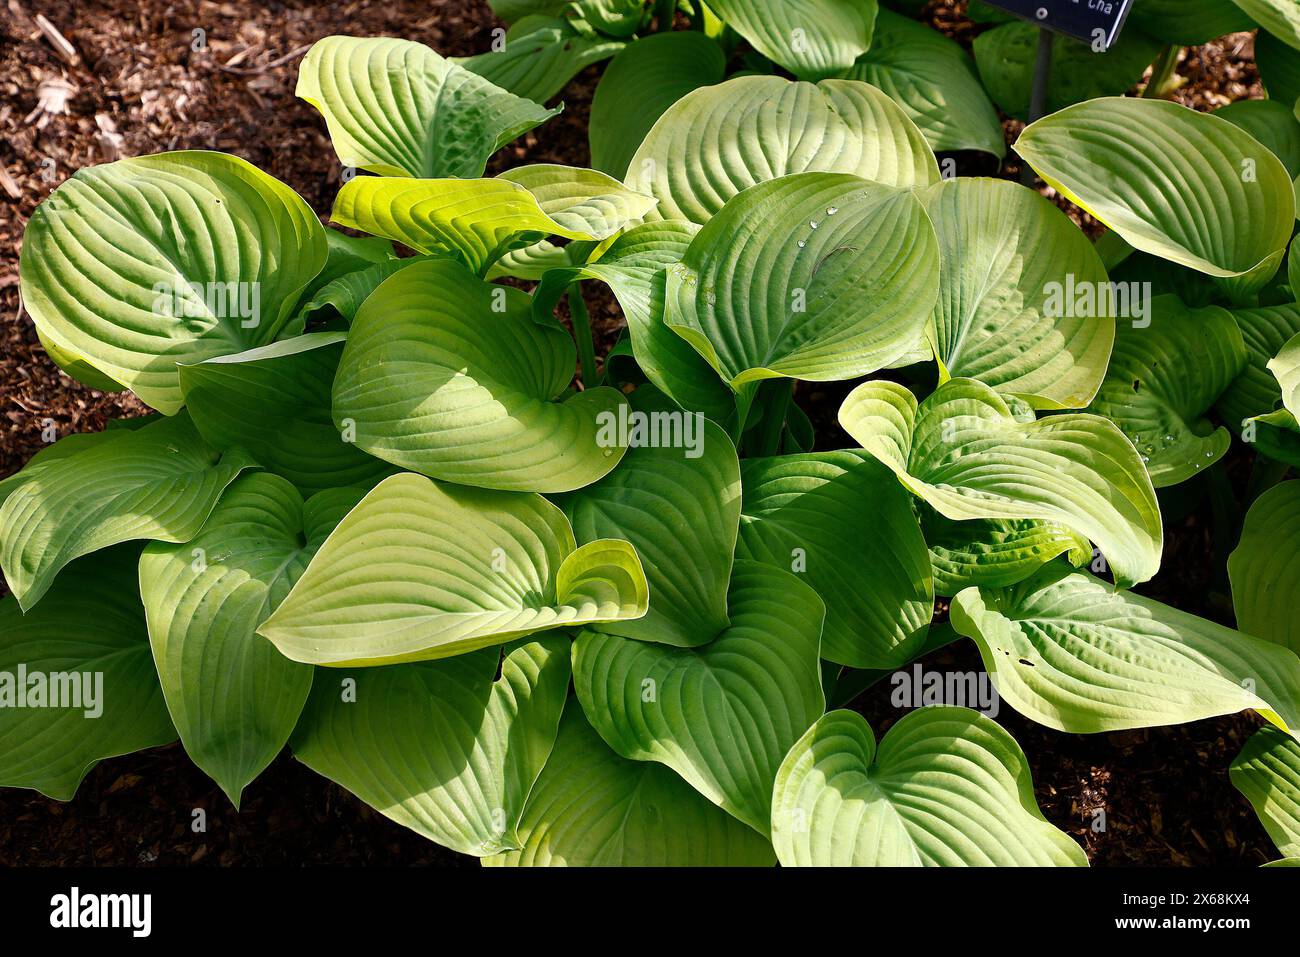 Closeup of the yellow green leaves of the herbaceous perennial garden plantain lily plant hosta lakeside cha cha. Stock Photo